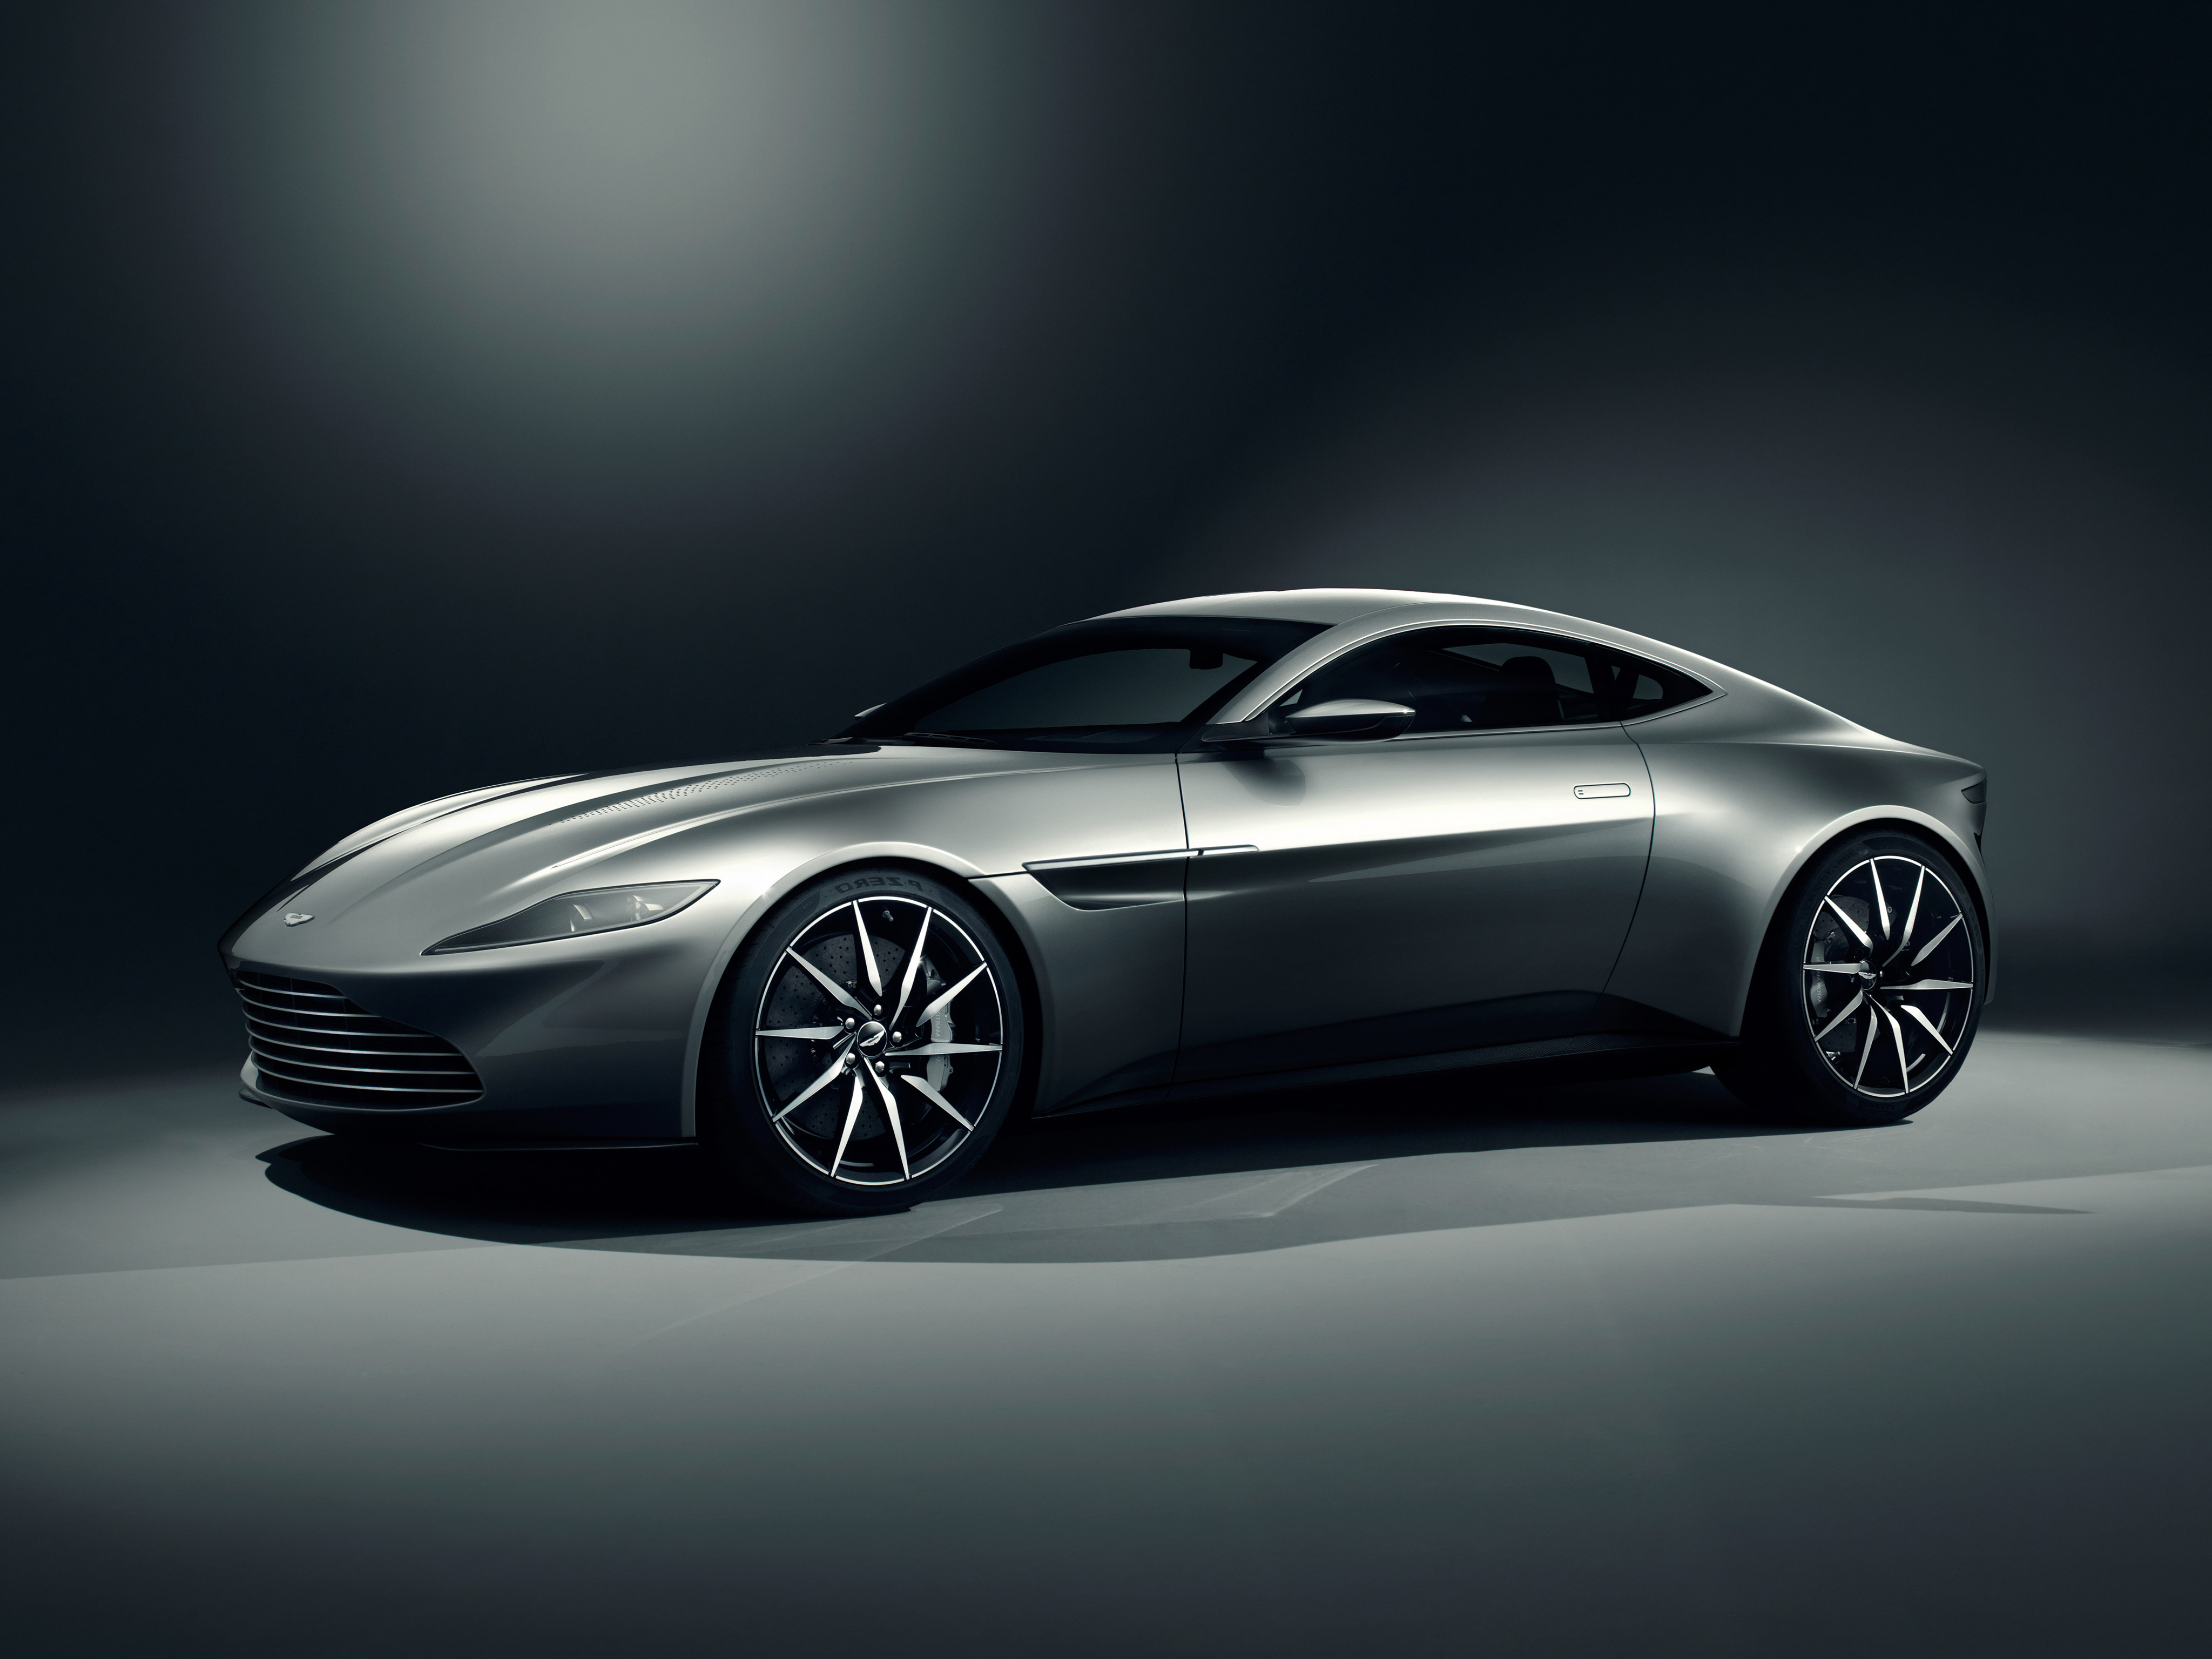 Wallpapers Aston Martin gray car side view on the desktop